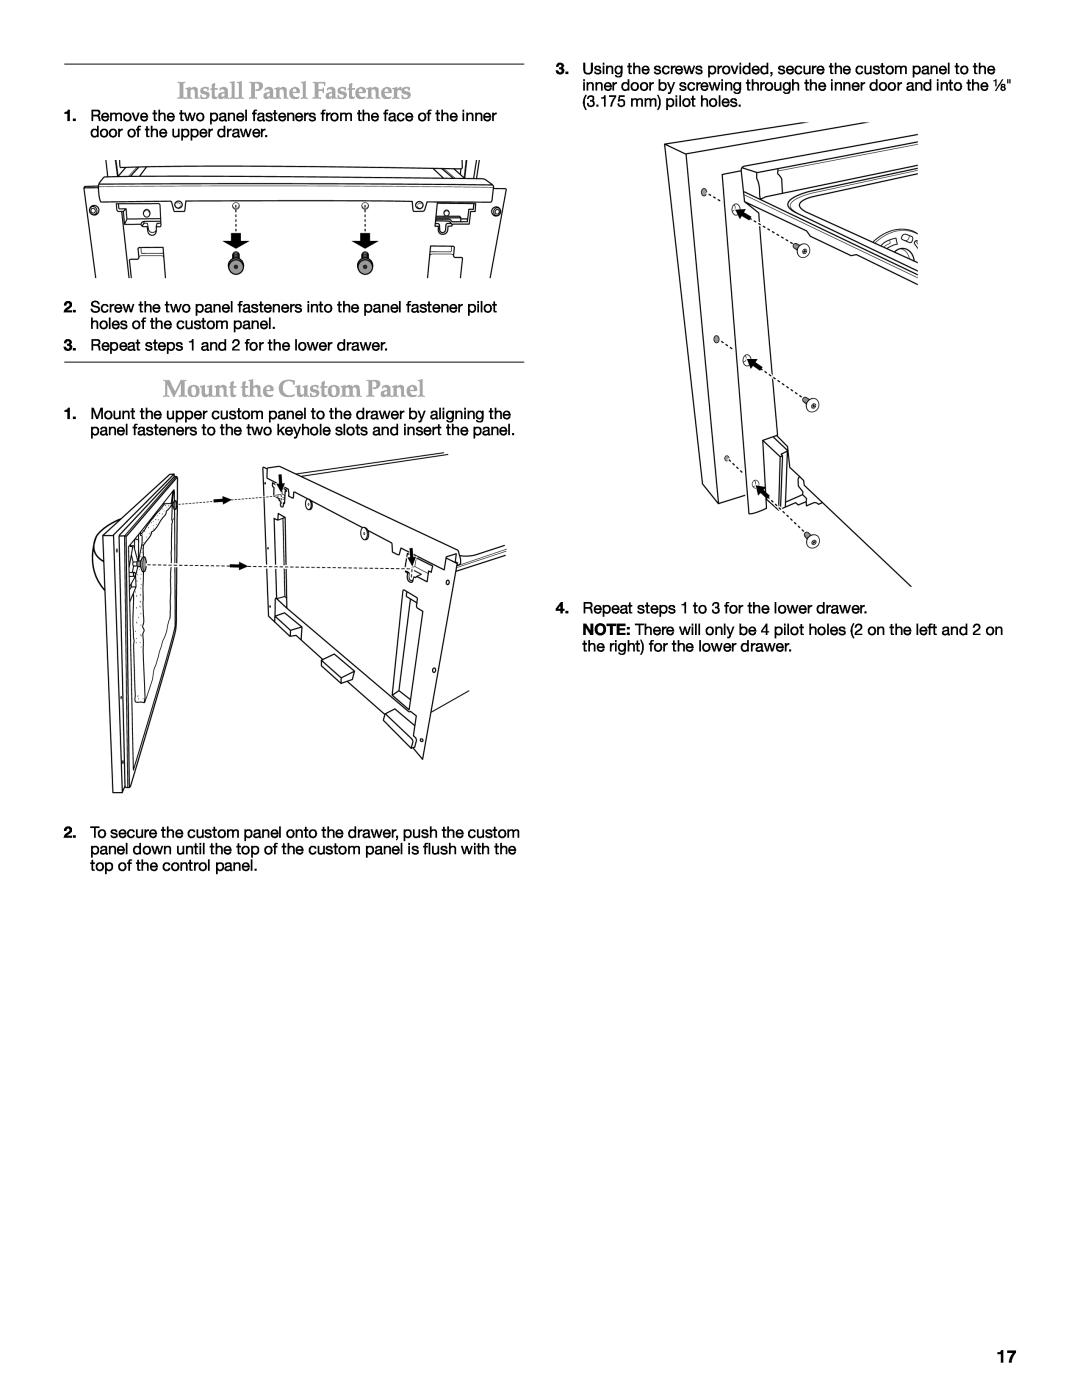 KitchenAid W10216167A installation instructions Install Panel Fasteners, Mount the Custom Panel 